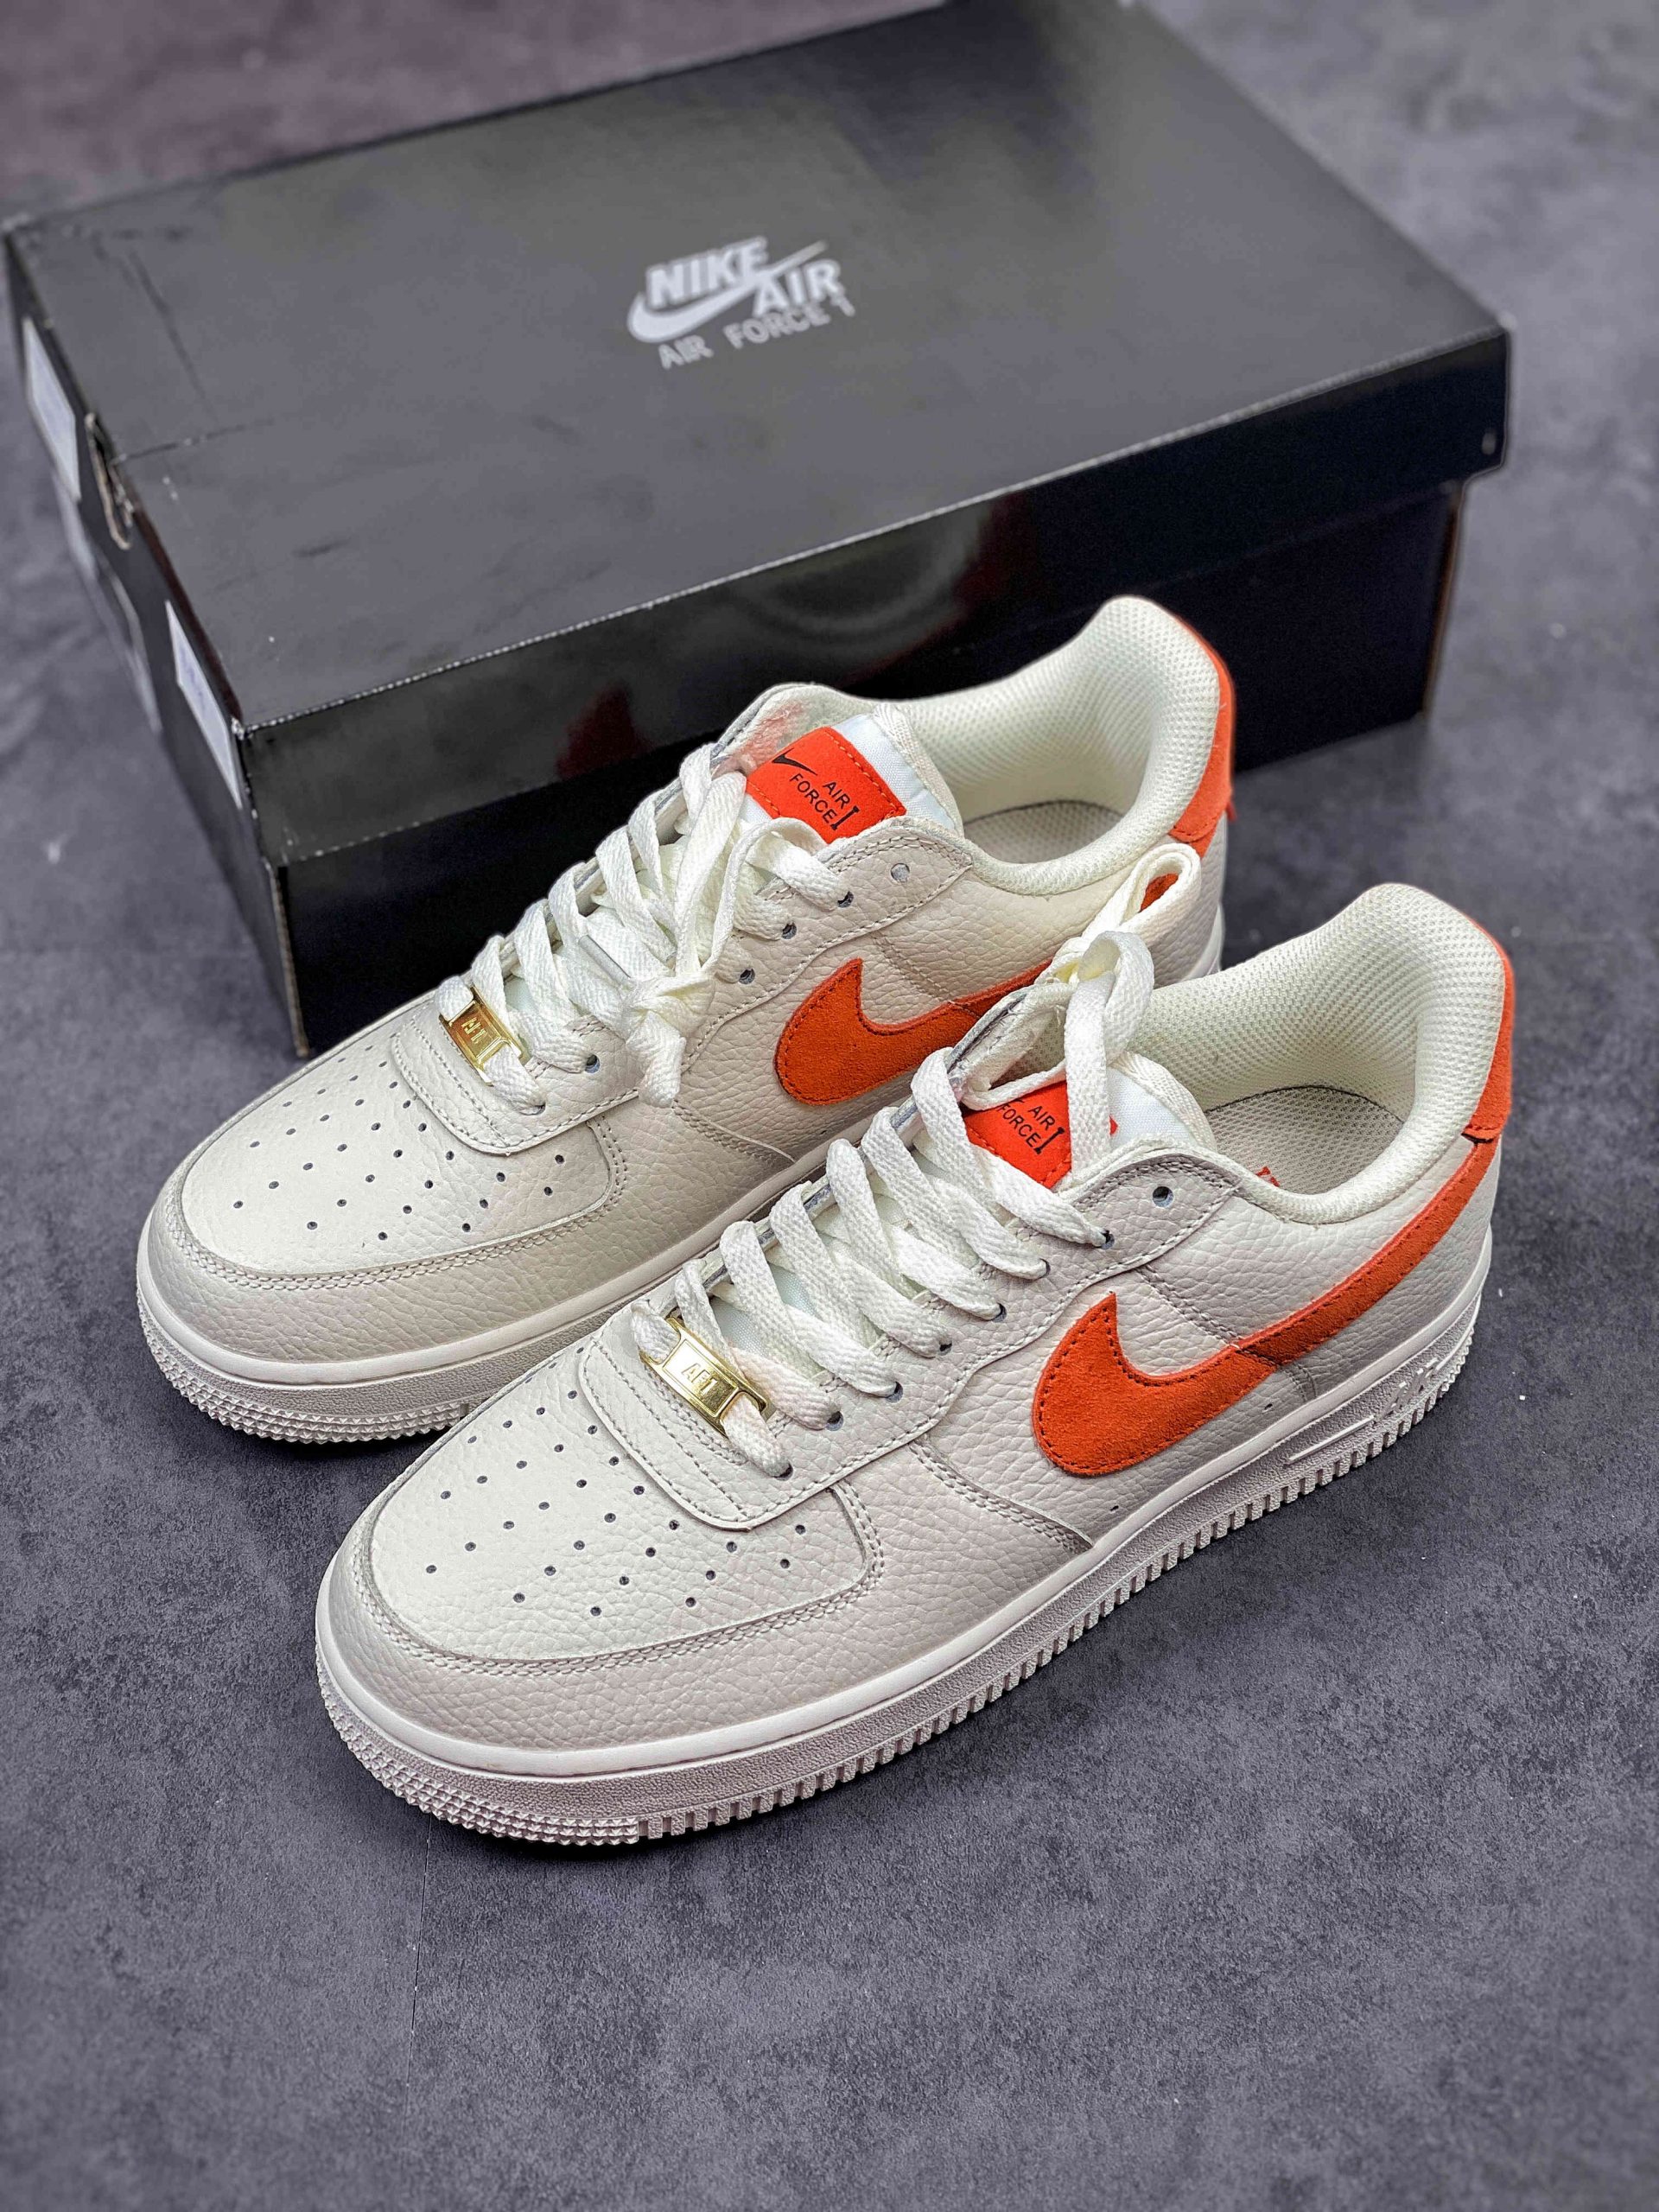 Nike Air Force 1 Low 07 Craft Sail/Mantra Orange/Forest For Sale ...